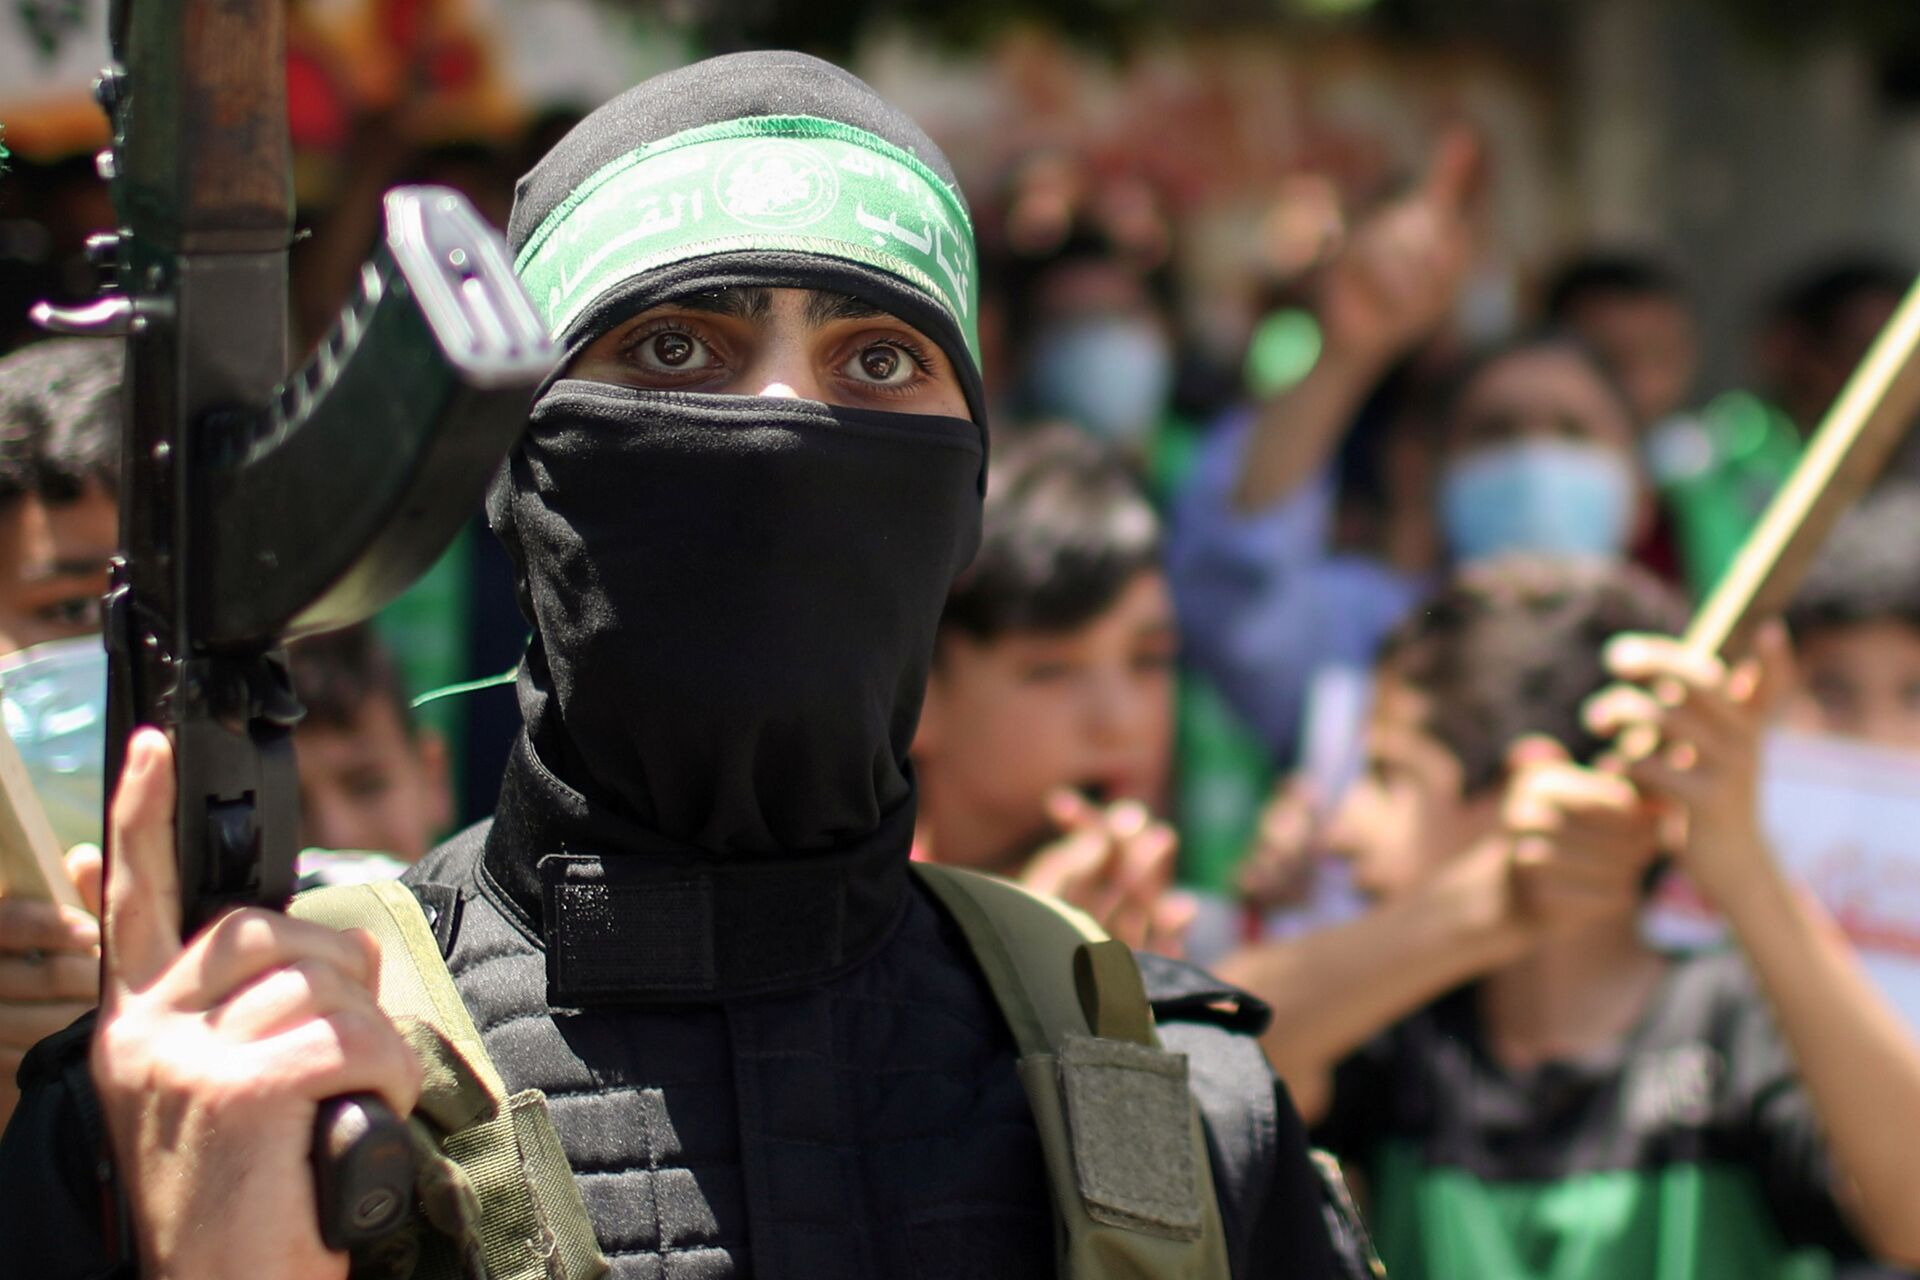 A Palestinian Hamas militant takes part in a protest over the possible eviction of several Palestinian families from homes on land claimed by Jewish settlers in the Jerusalem's Sheikh Jarrah neighbourhood, in the northern Gaza Strip May 7, 2021 - Sputnik International, 1920, 07.09.2021